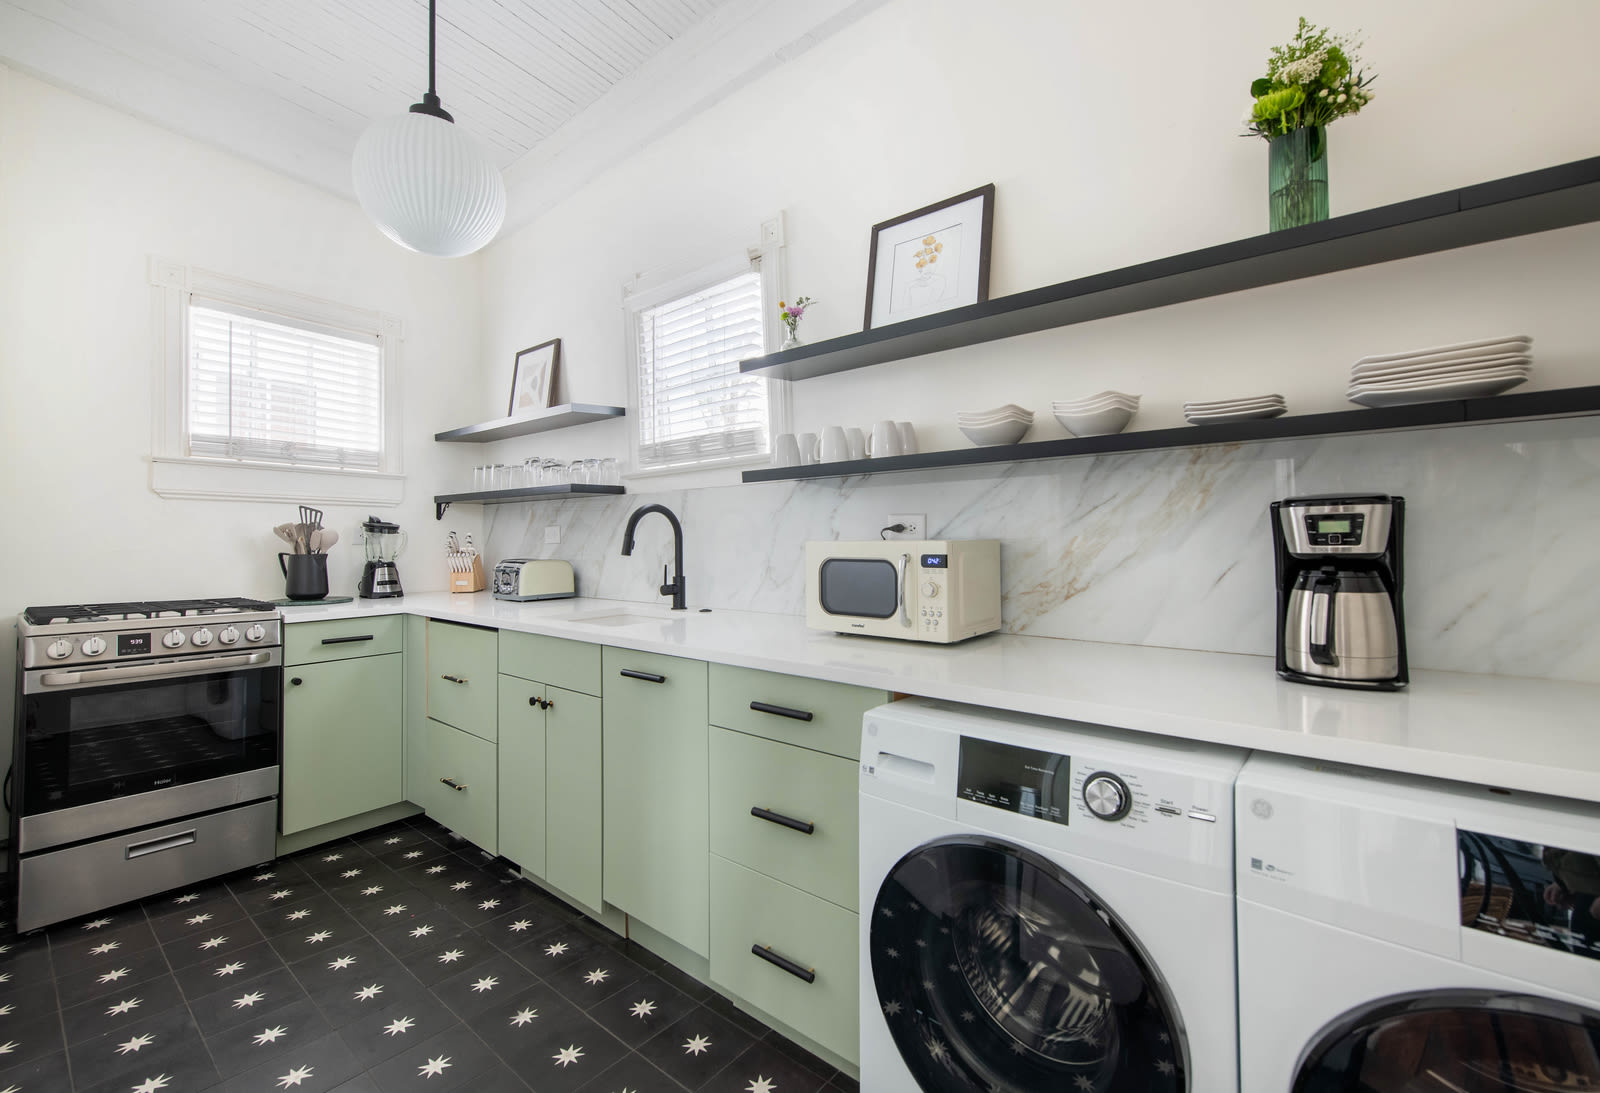 Fully equipped kitchen with everything you need to cook a meal + washer and dryer for your use!